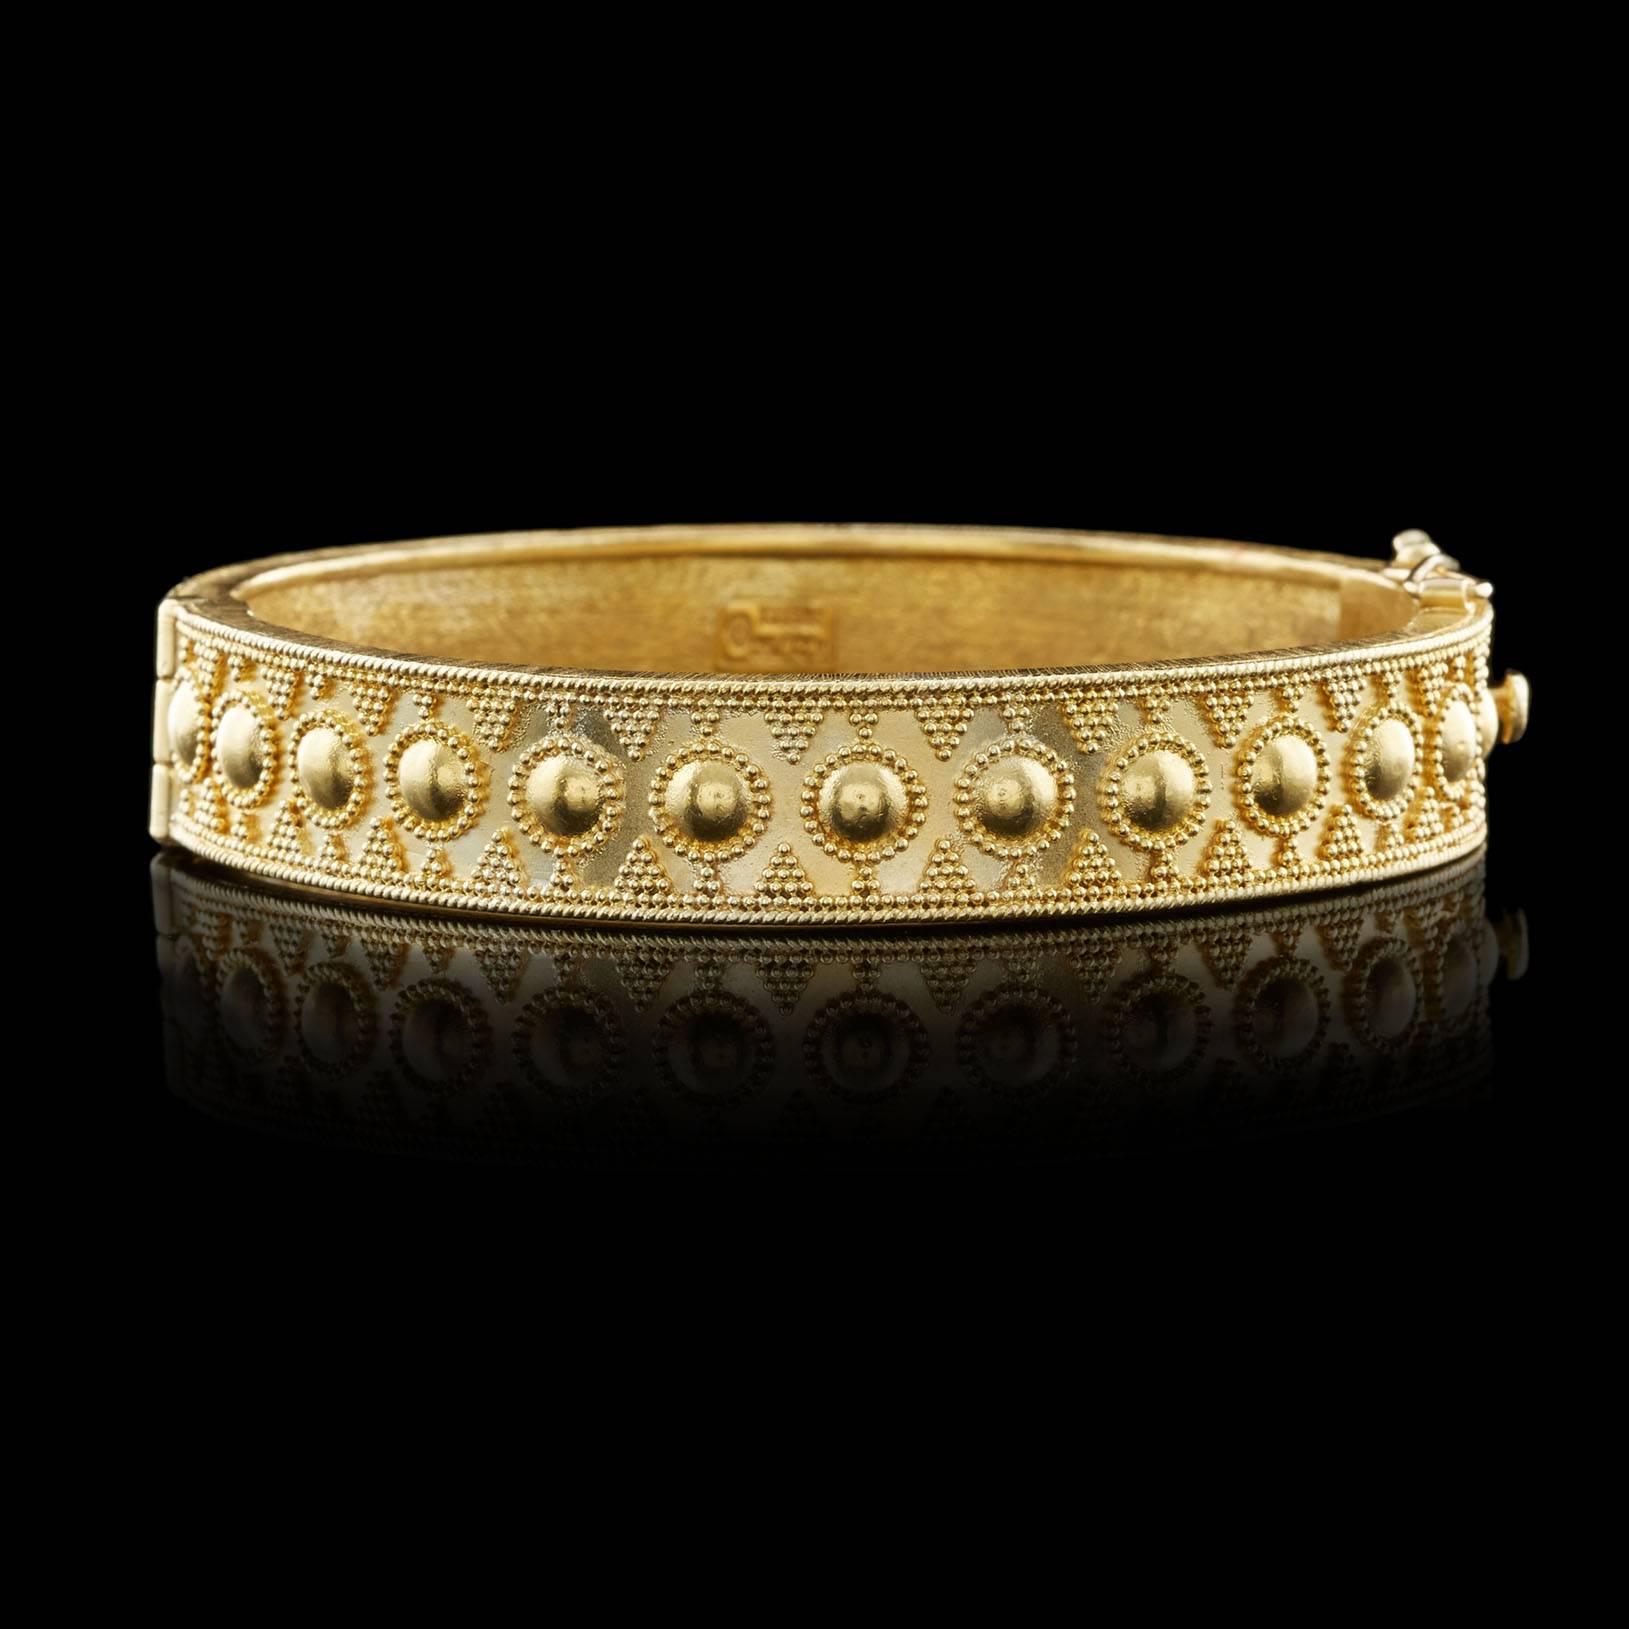 Lalaounis Beautifully Crafted 18Kt Yellow Gold Bangle, From the Greek Designer. The bracelet measures 7 inches around and 10.5mm wide. This piece weighs 35.9 grams.